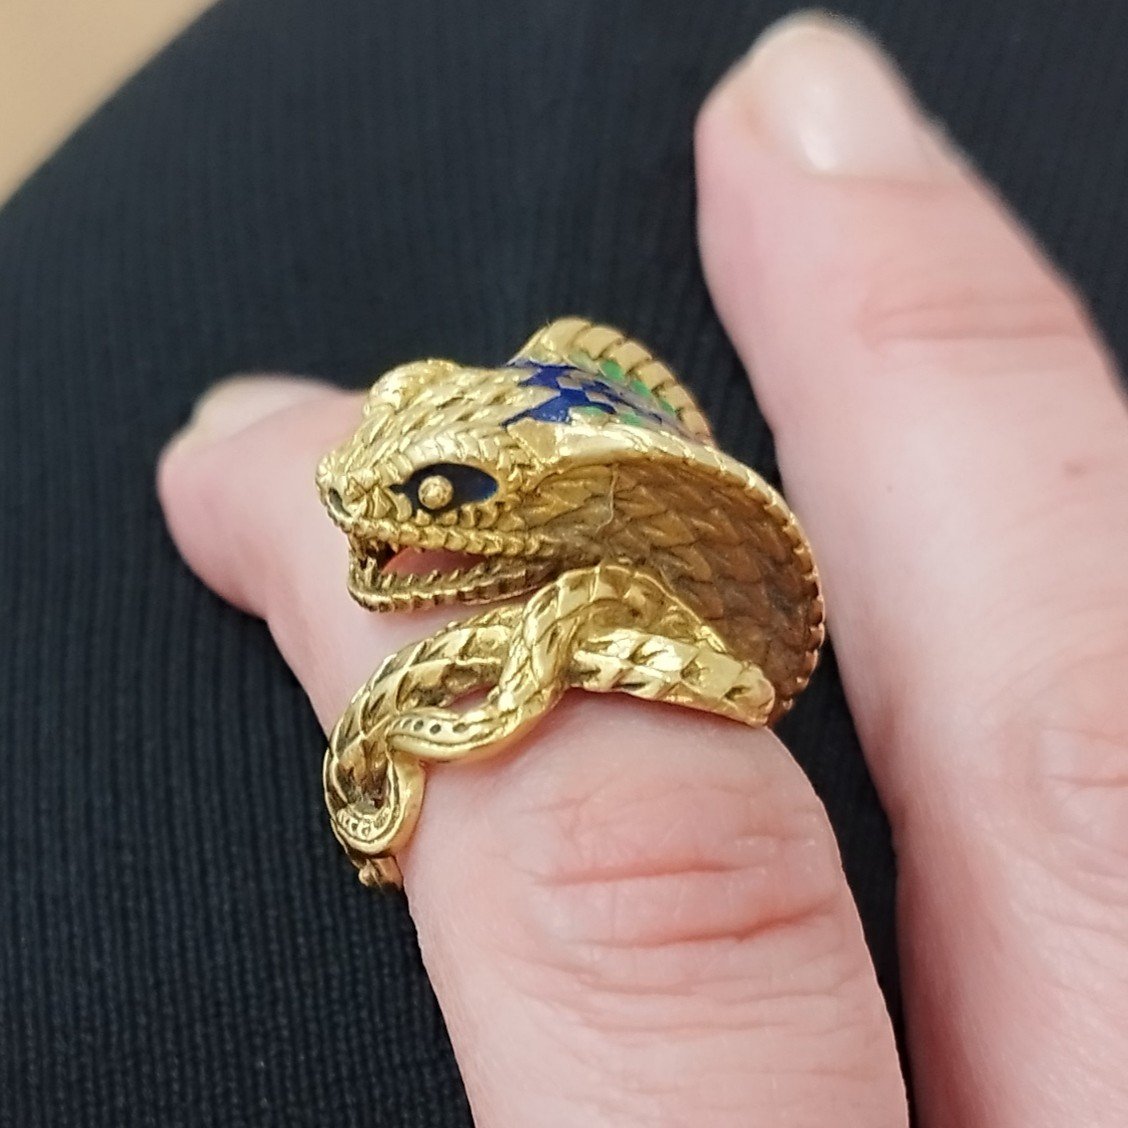 Cobra Ring Carved In 18 Carat Gold And Colored Enamel.-photo-2